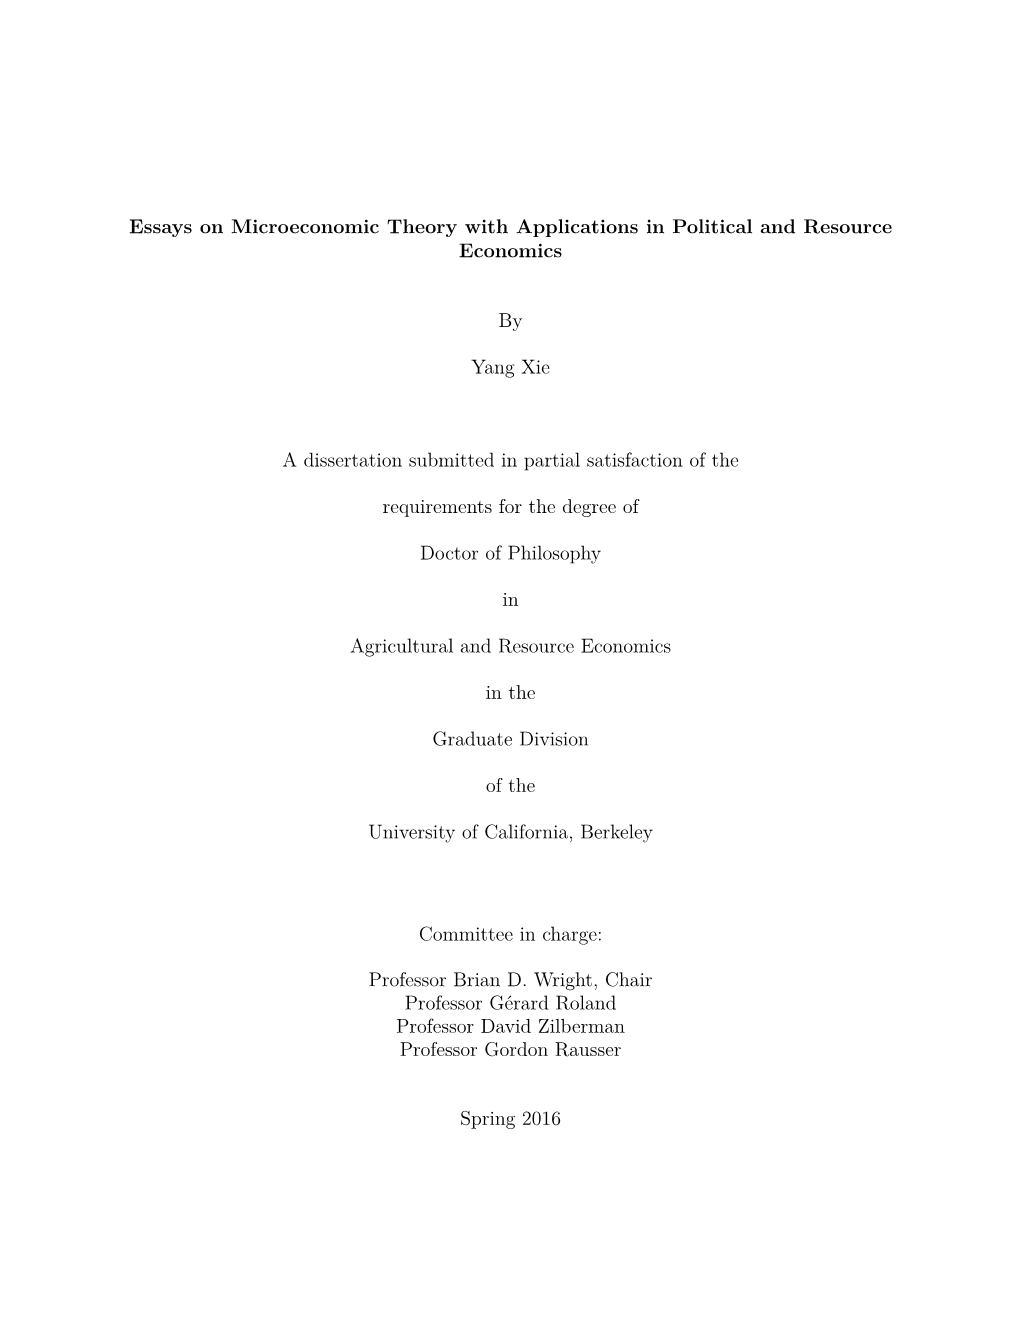 Essays on Microeconomic Theory with Applications in Political and Resource Economics